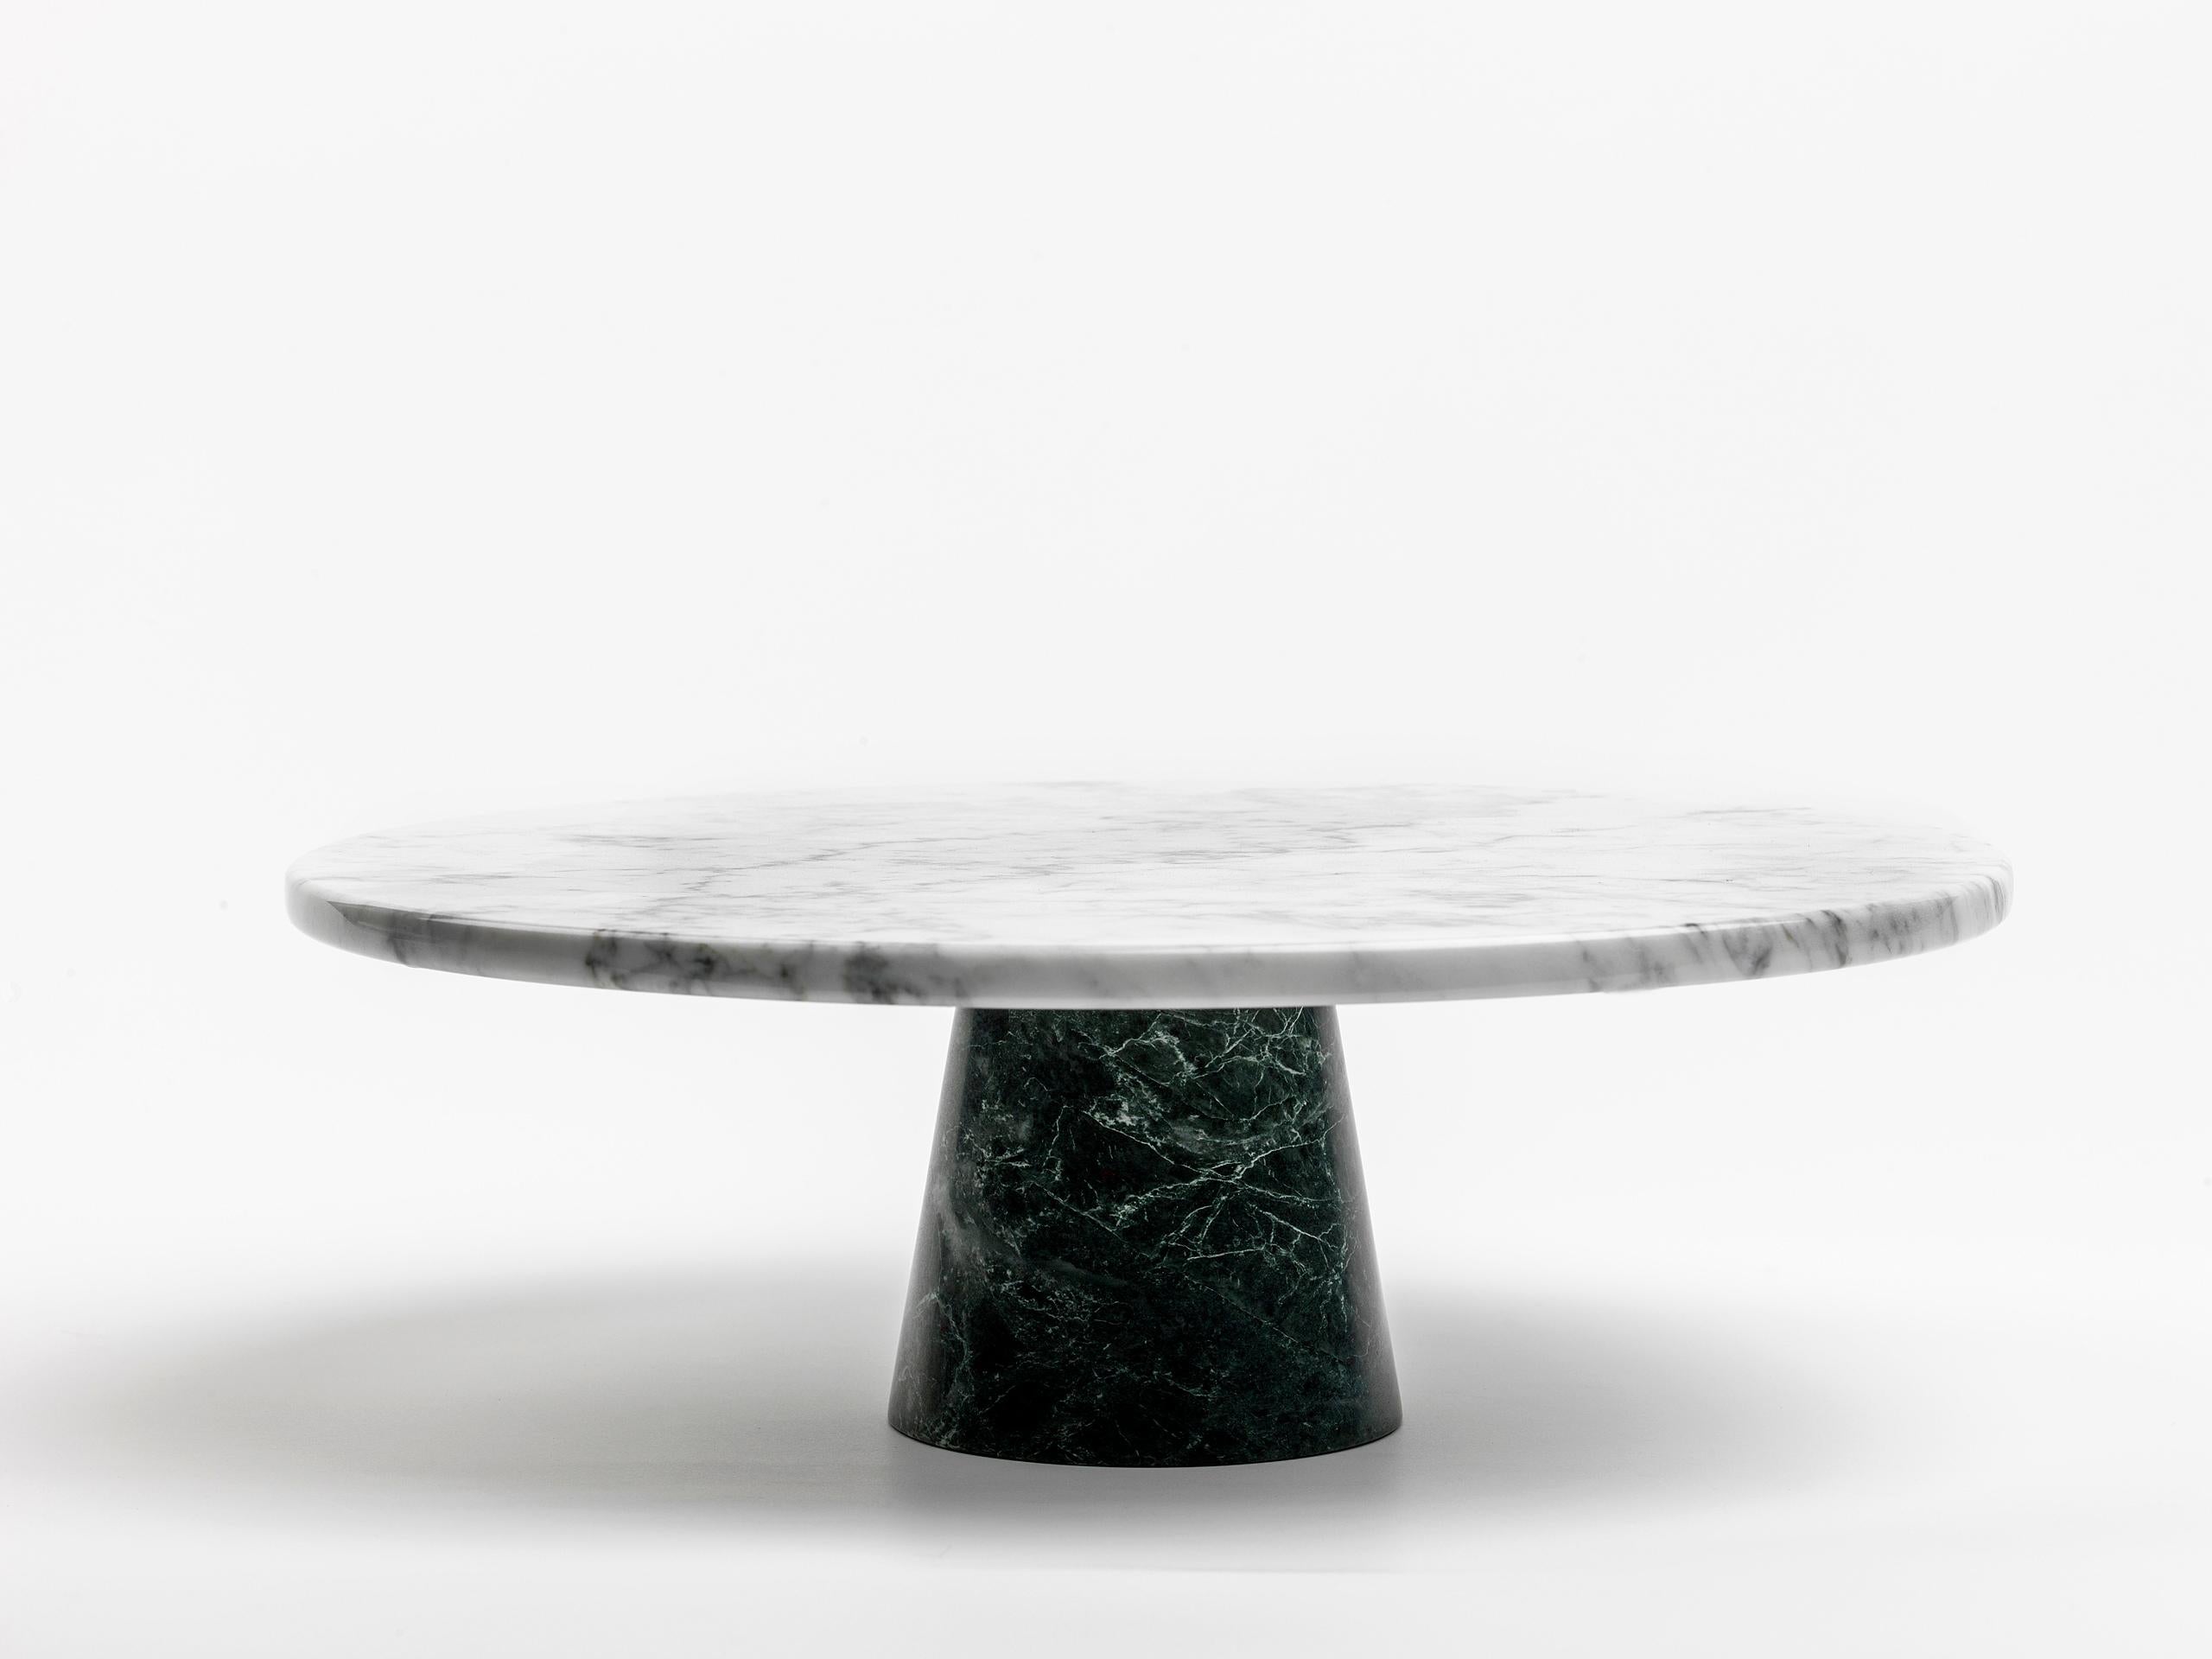 Marble stand cake with top dish in white Carrara marble and black Marquina marble base. Each piece is in a way unique (every marble block is different in veins and shades) and handmade by Italian artisans specialized over generations in processing